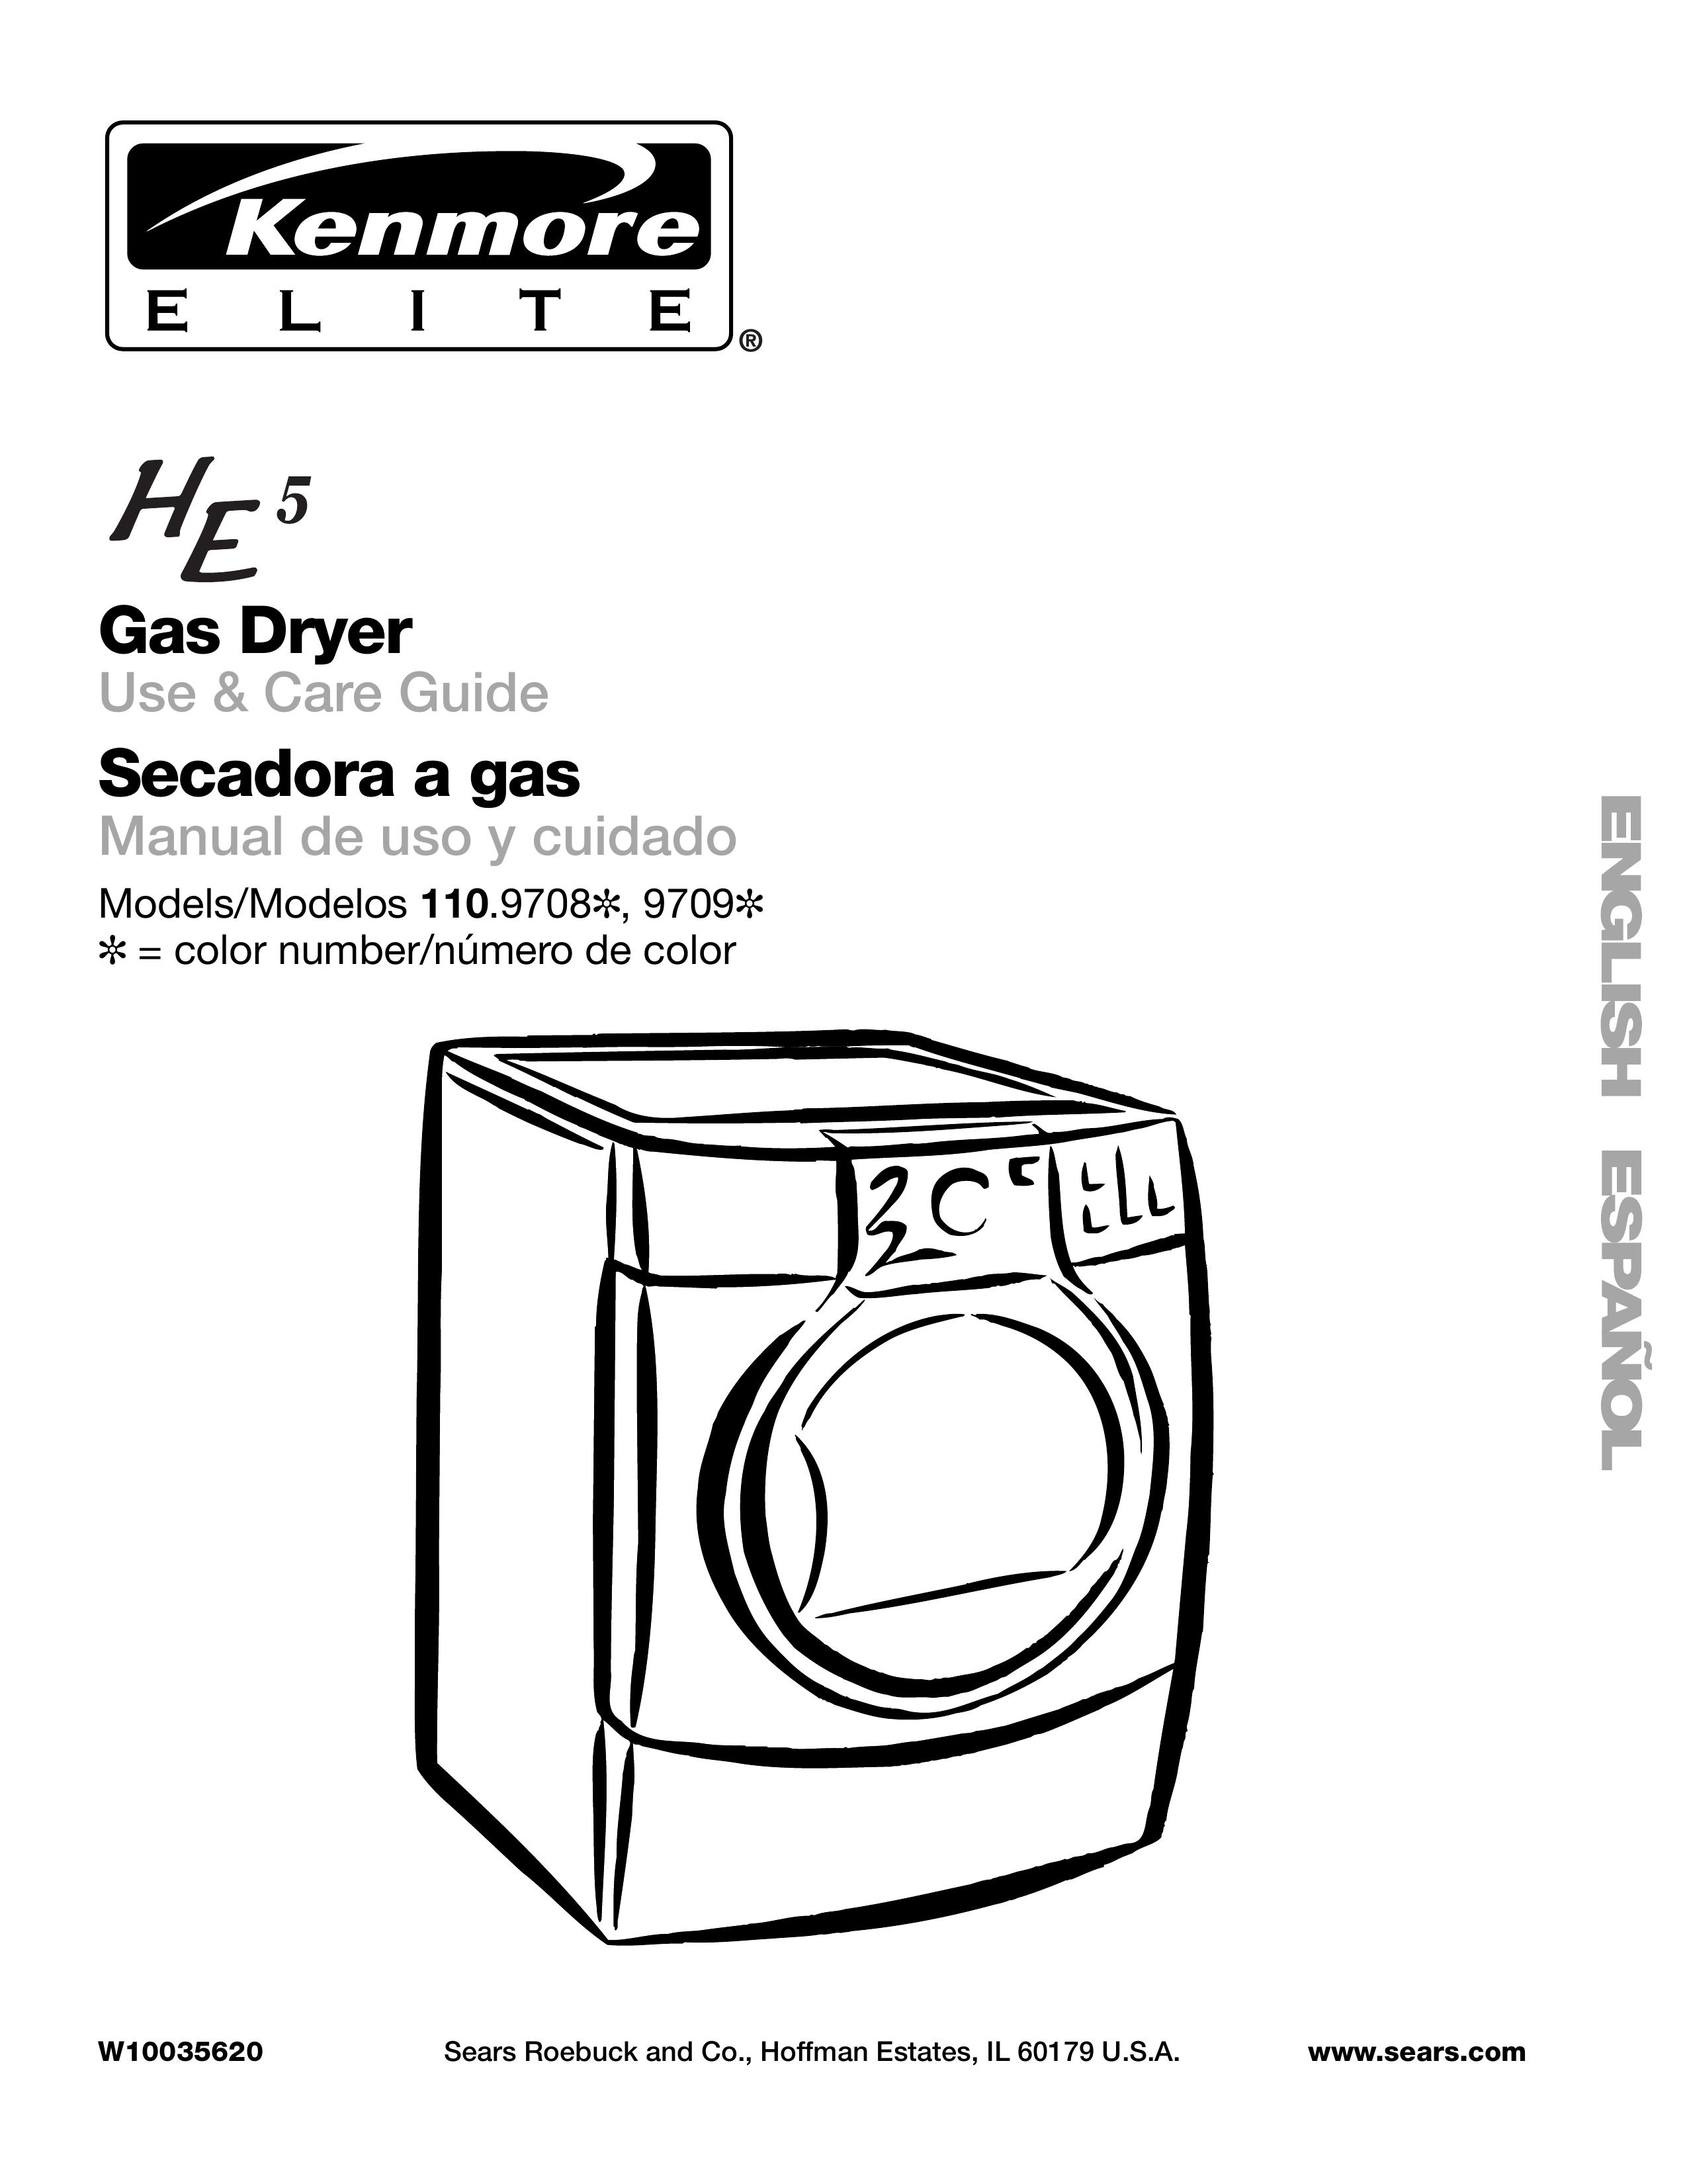 Sears 9709 Clothes Dryer User Manual